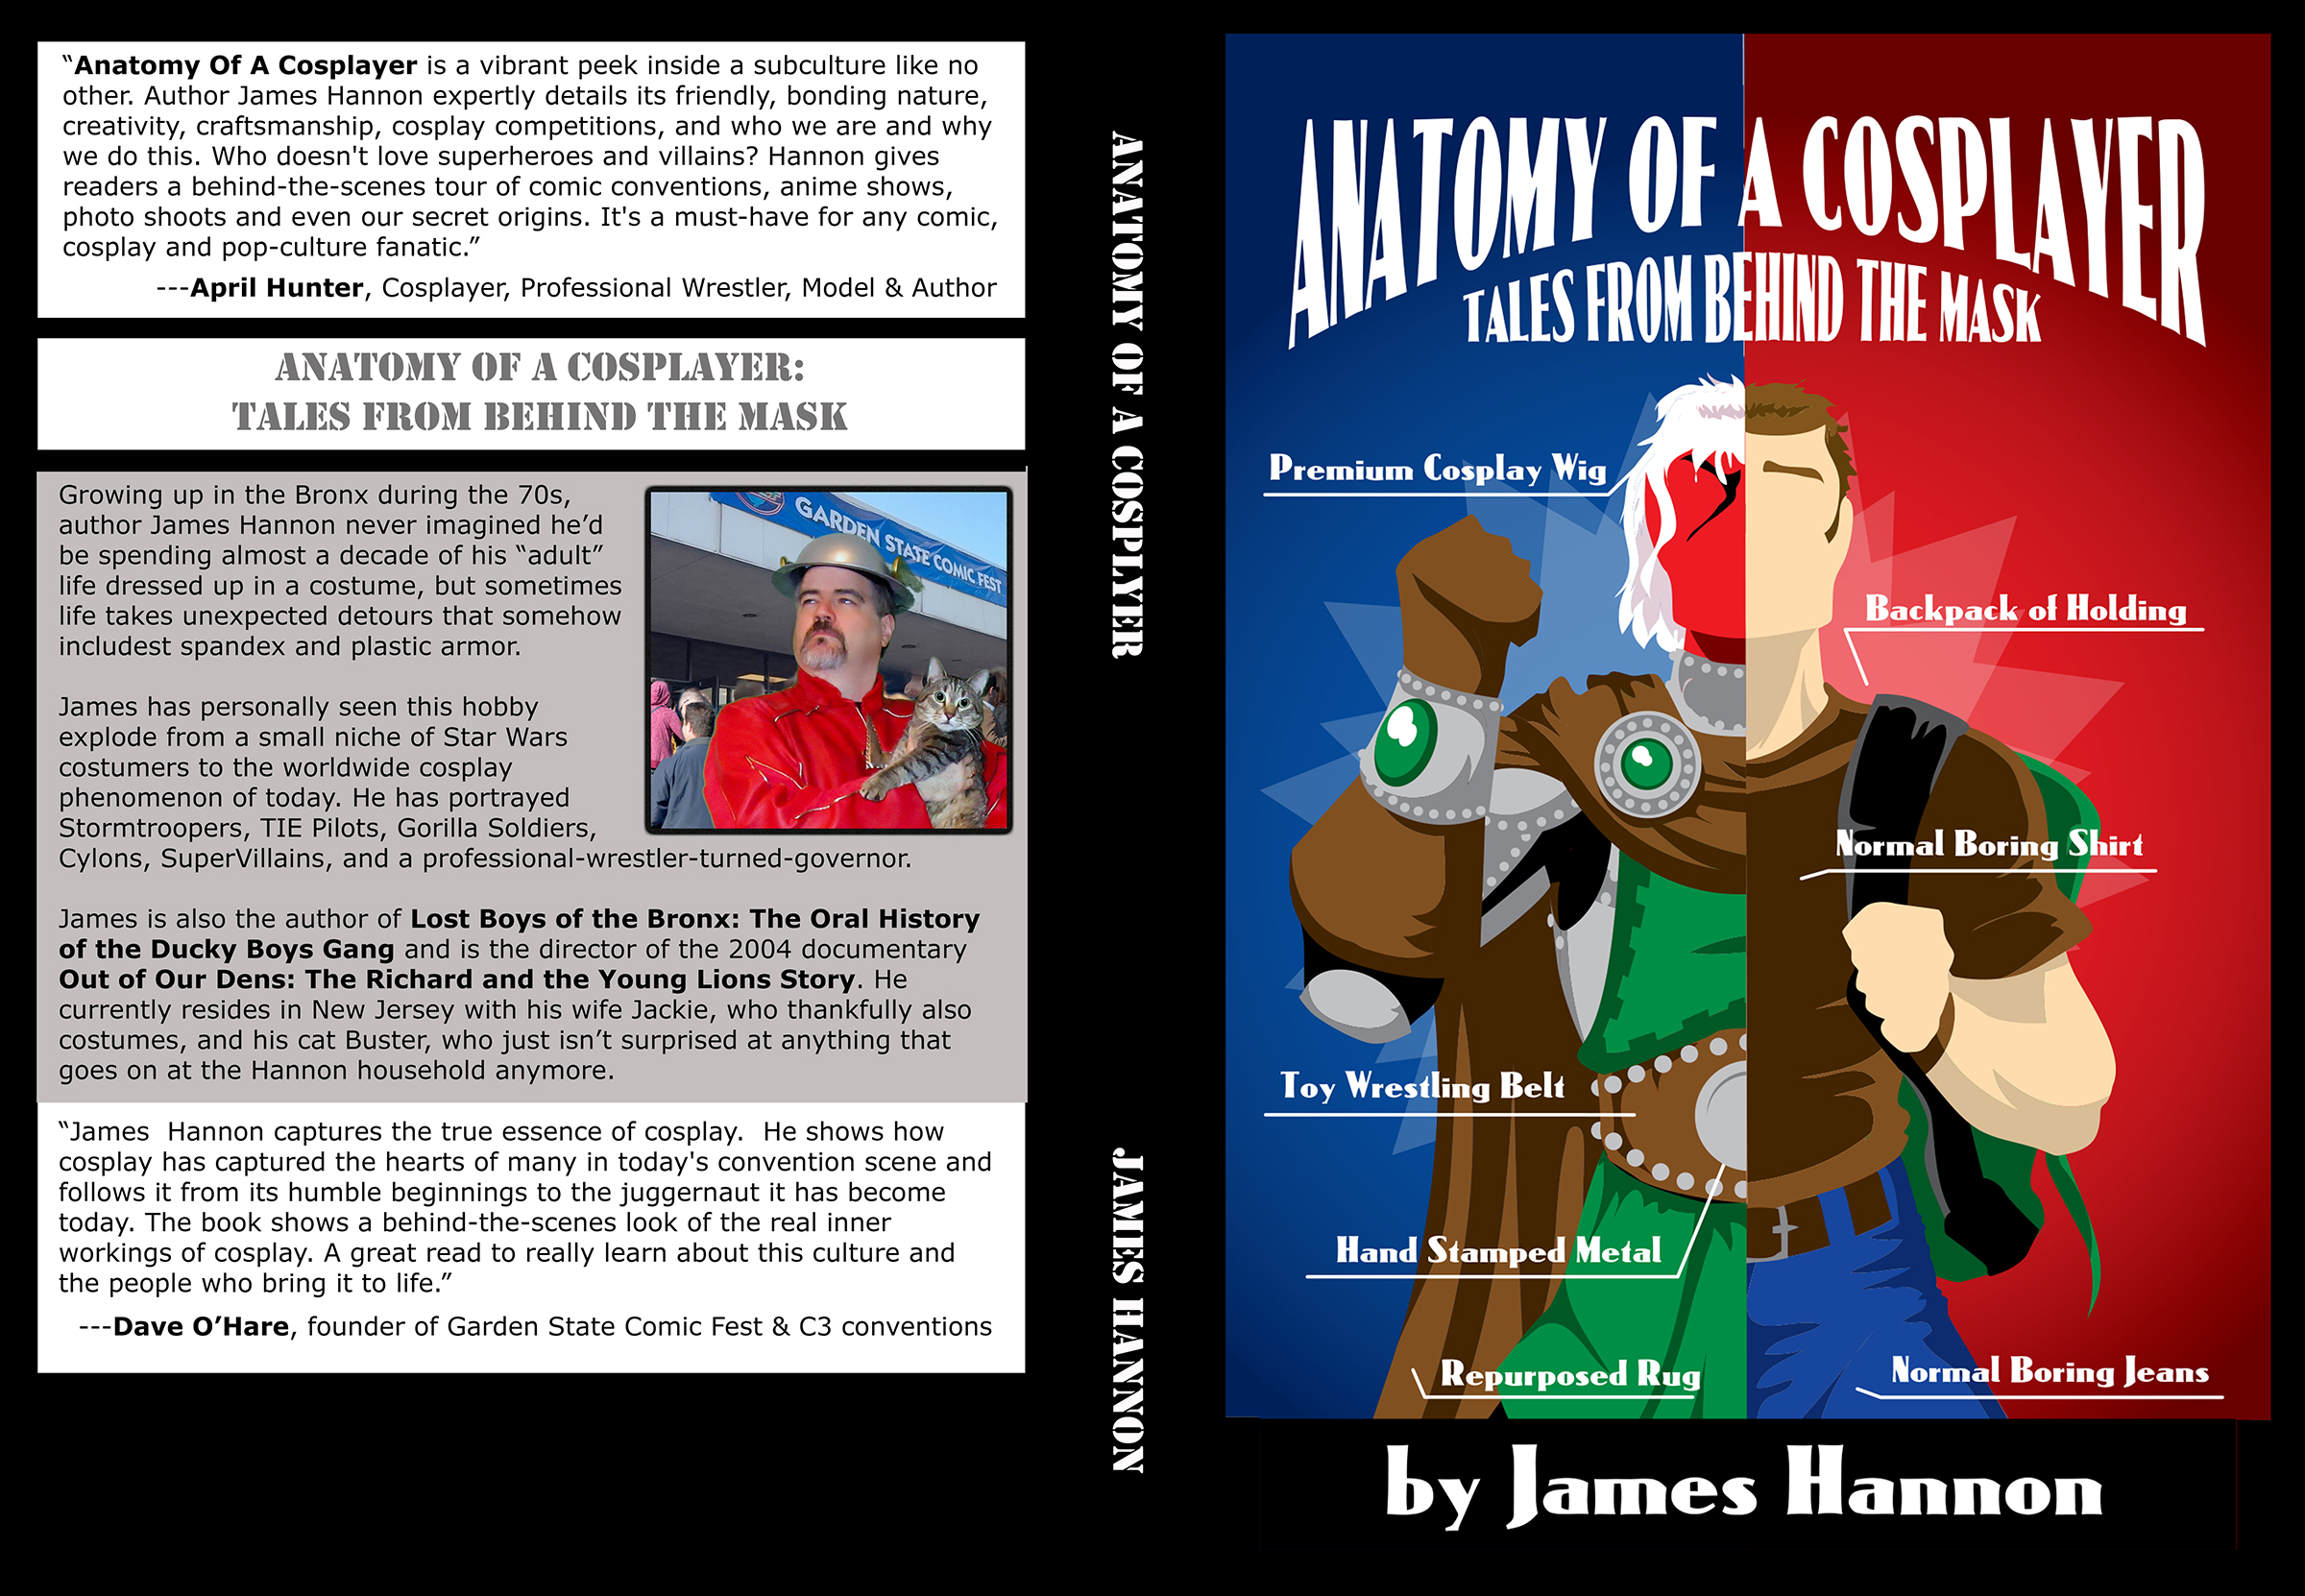 Covers of Anatomy of a Cosplayer book